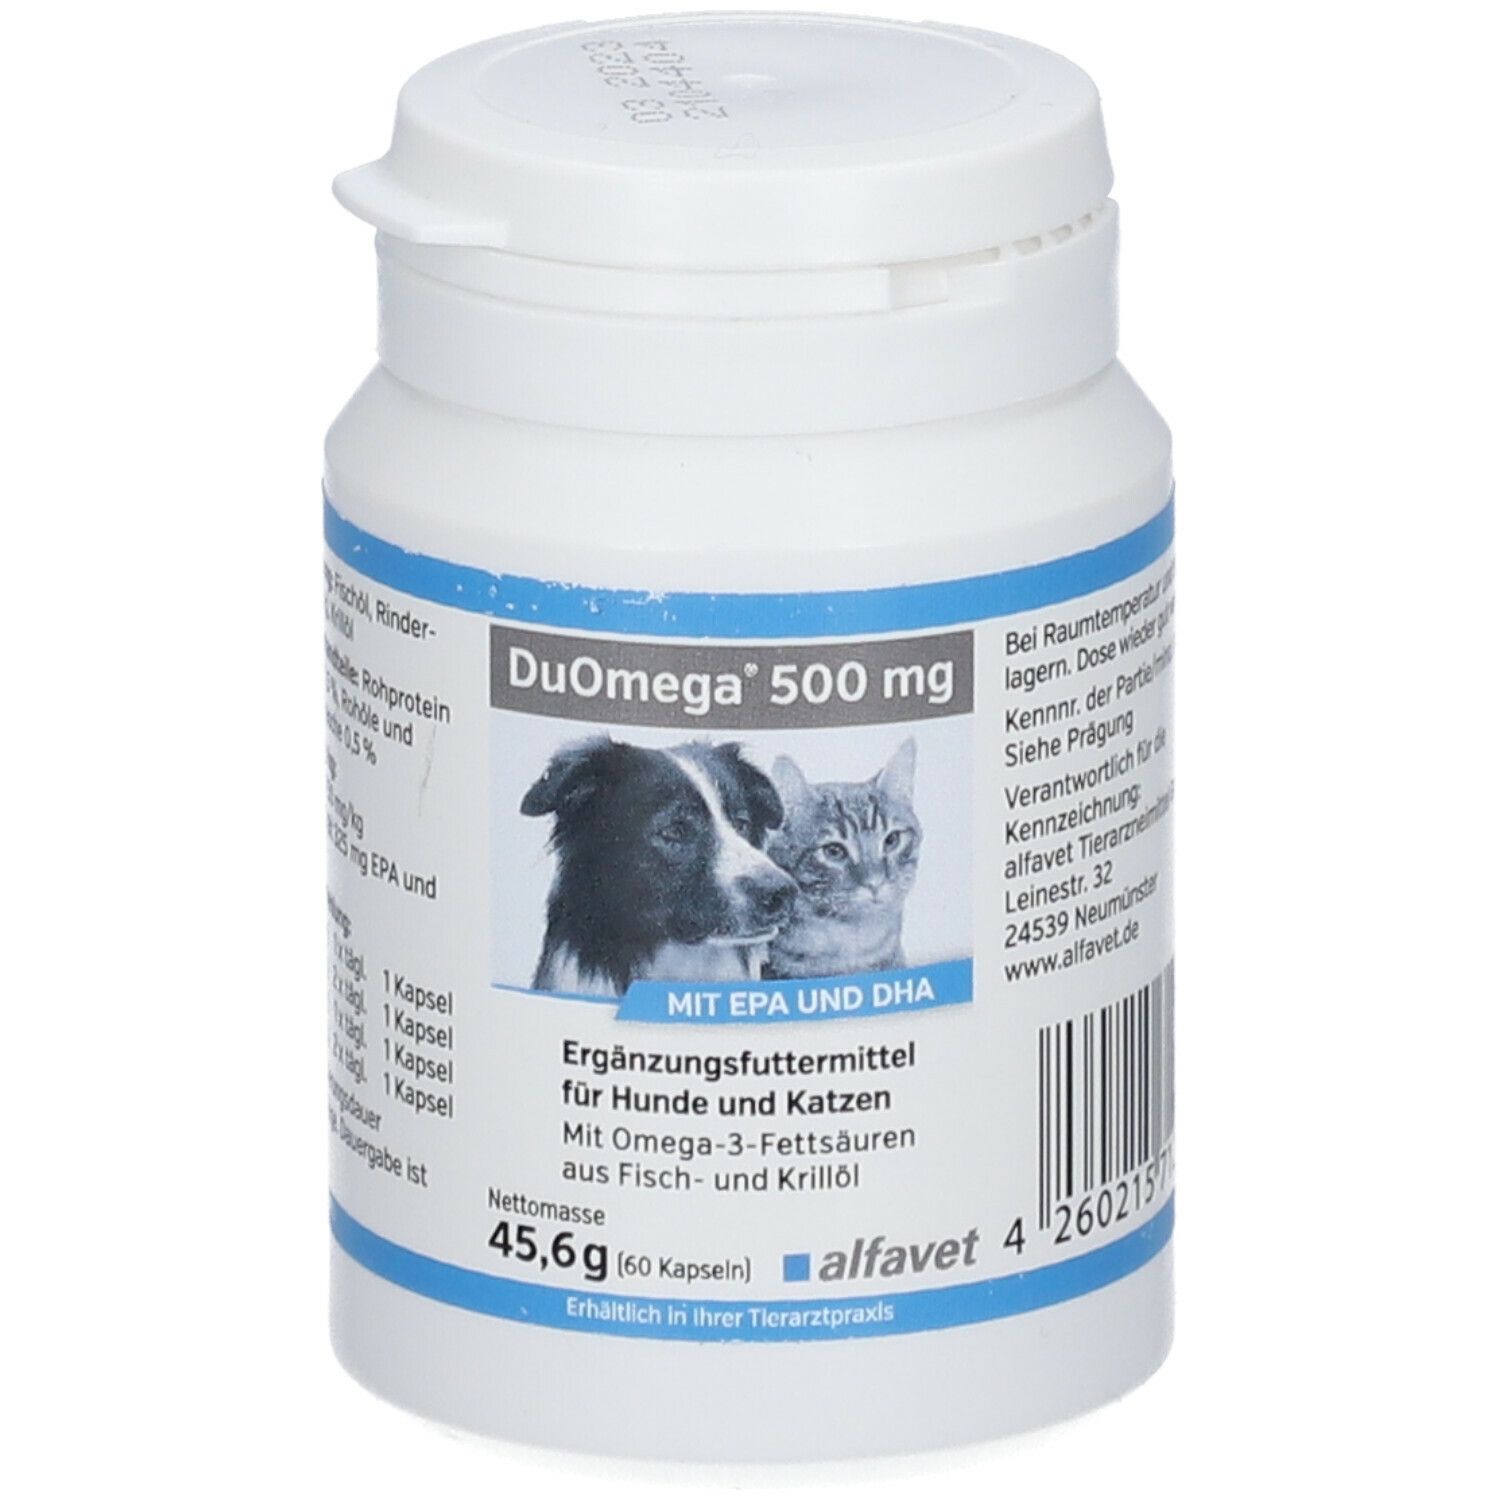 DuOmega® 500 mg pour chiens et chats